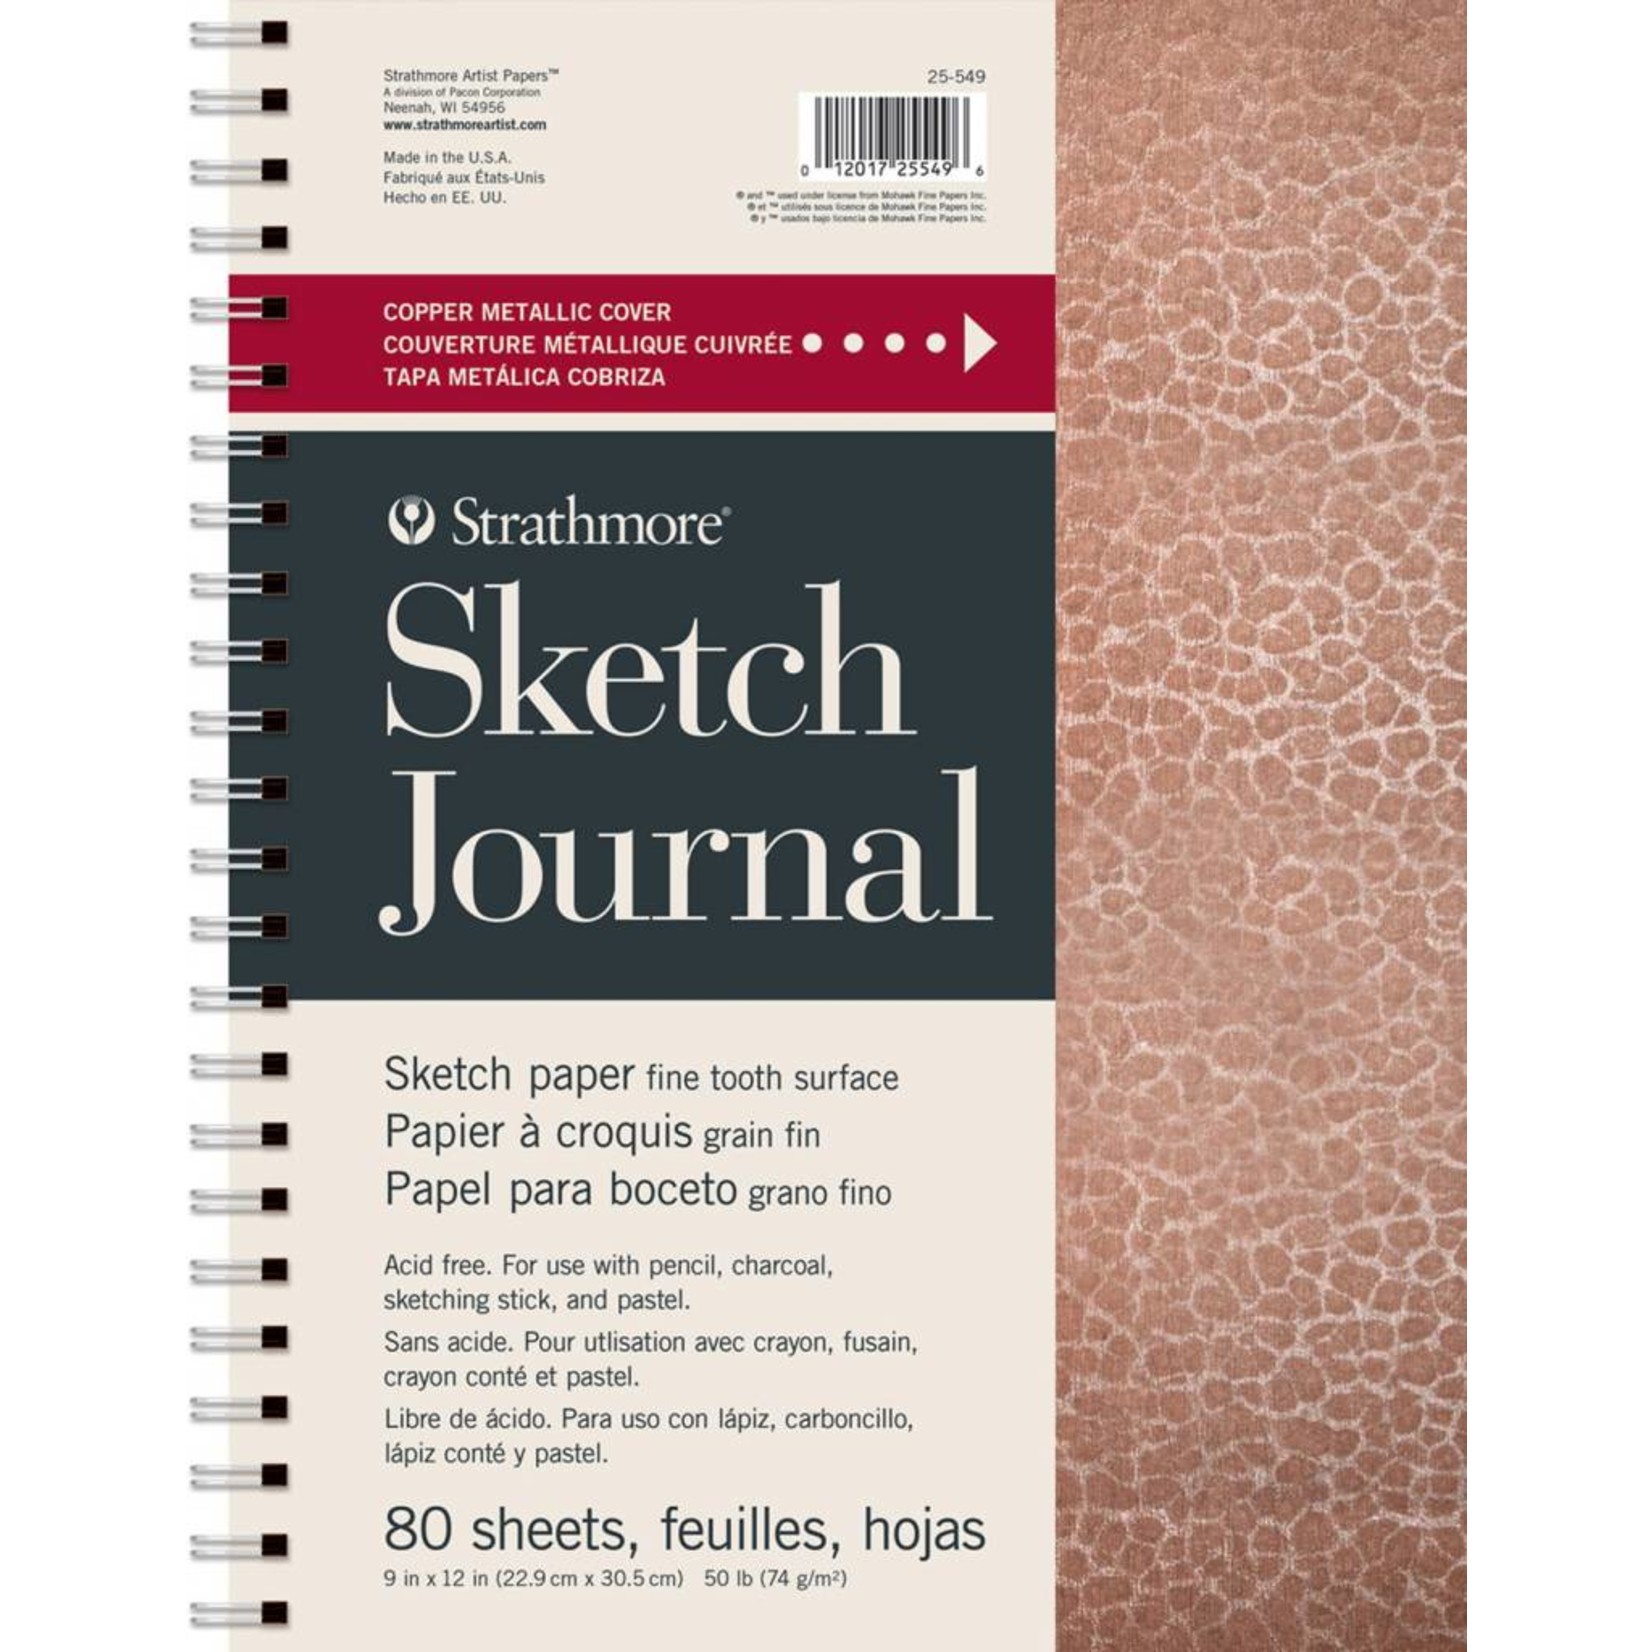 STRATHMORE STRATHMORE ARTIST PAPERS METALLIC COPPER 9X12" SKETCH JOURNAL 80 SHEET BOOK